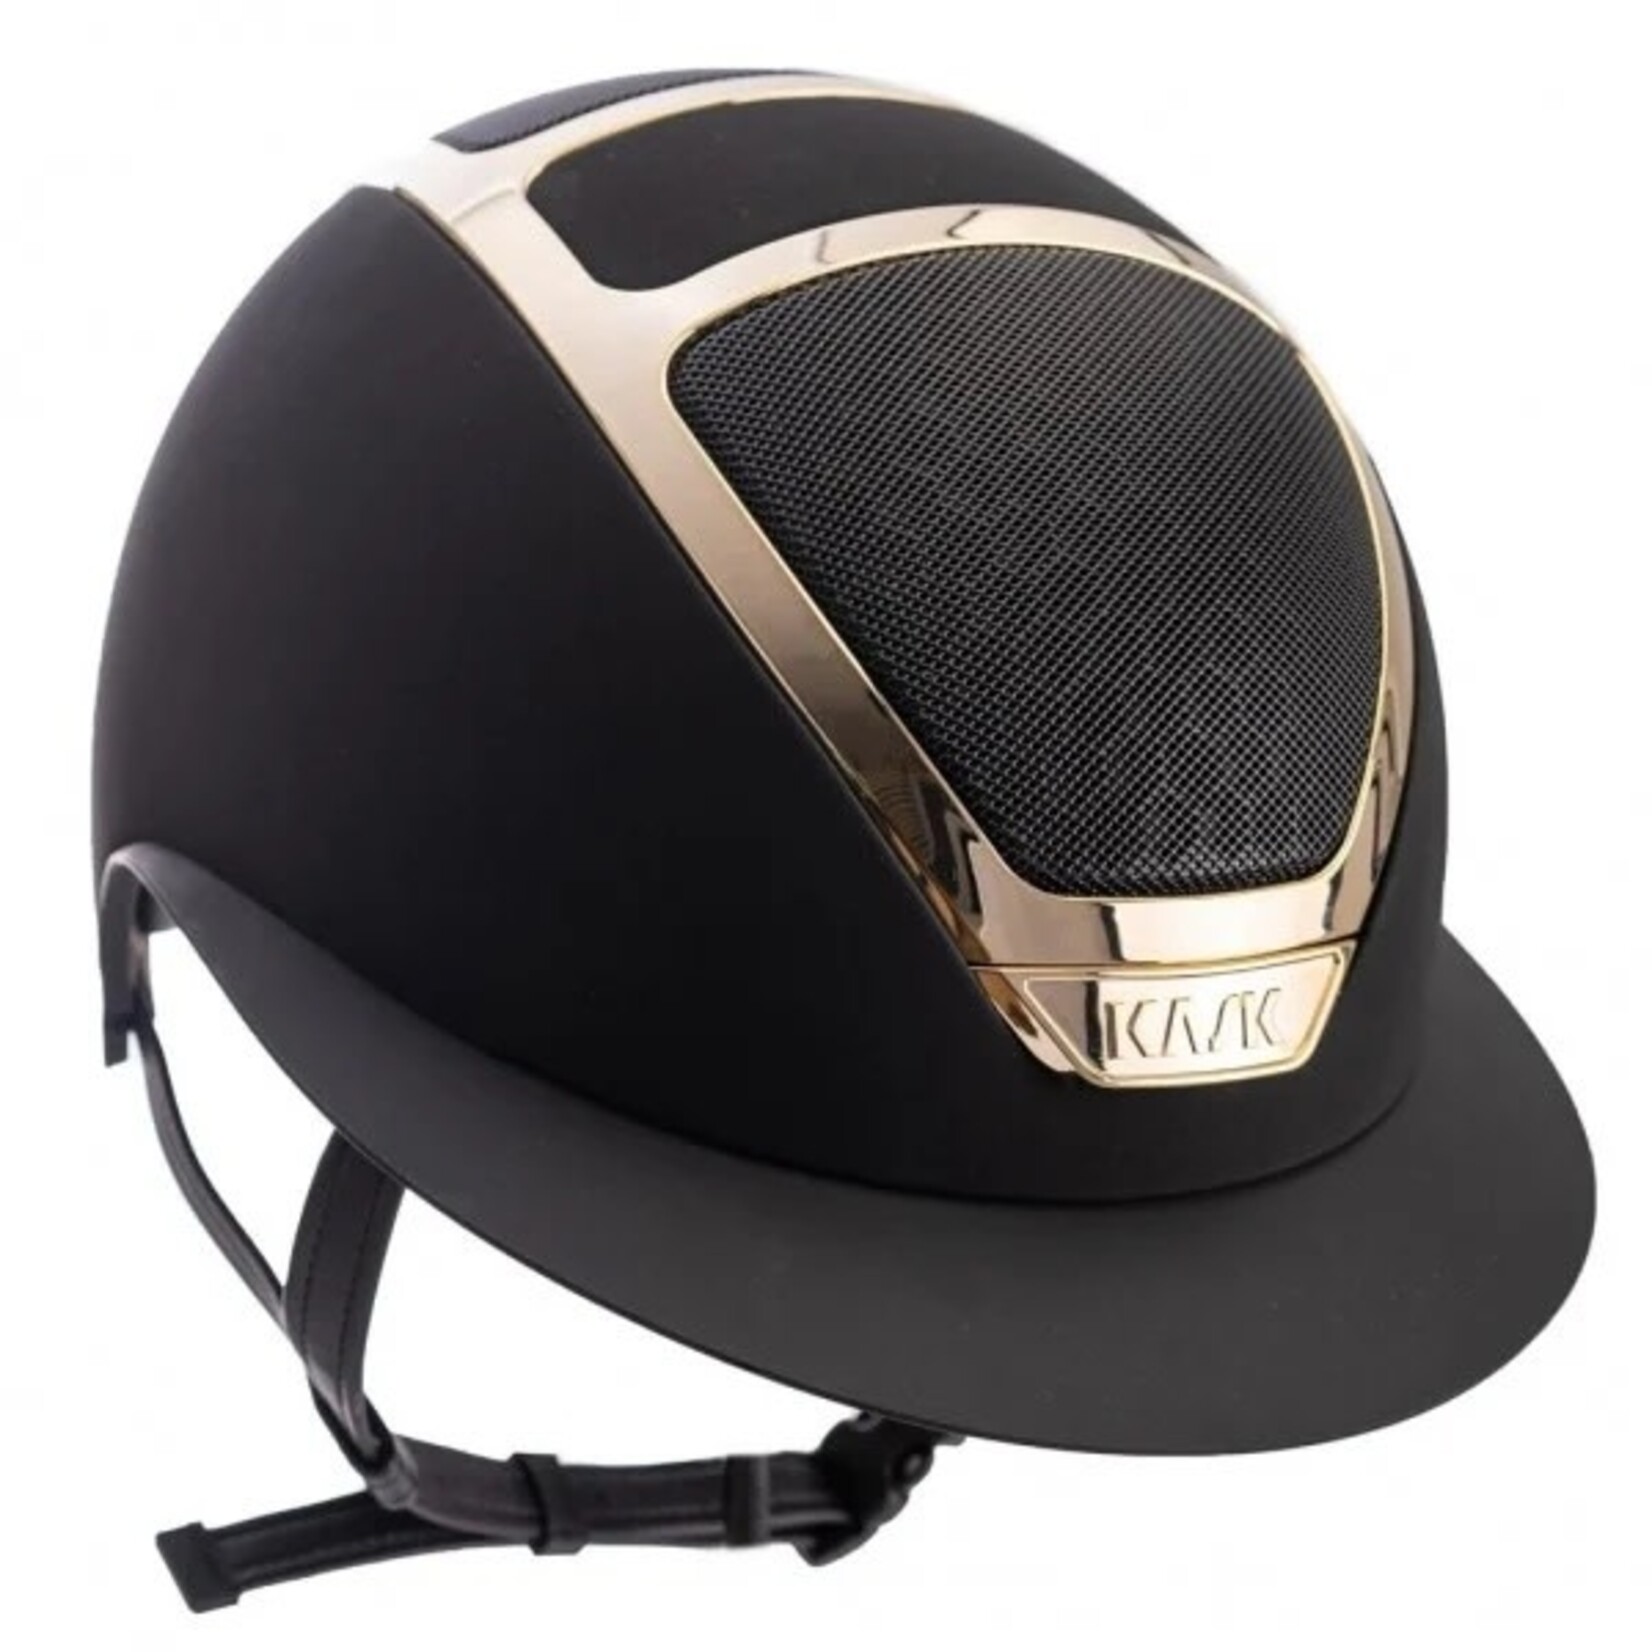 KASK Equestrian Star Lady Riding Helmet Custom Brown/Gold - Sold as a kit with coordinating liner (sold separately), Brown/Gold, 1 (55-56)